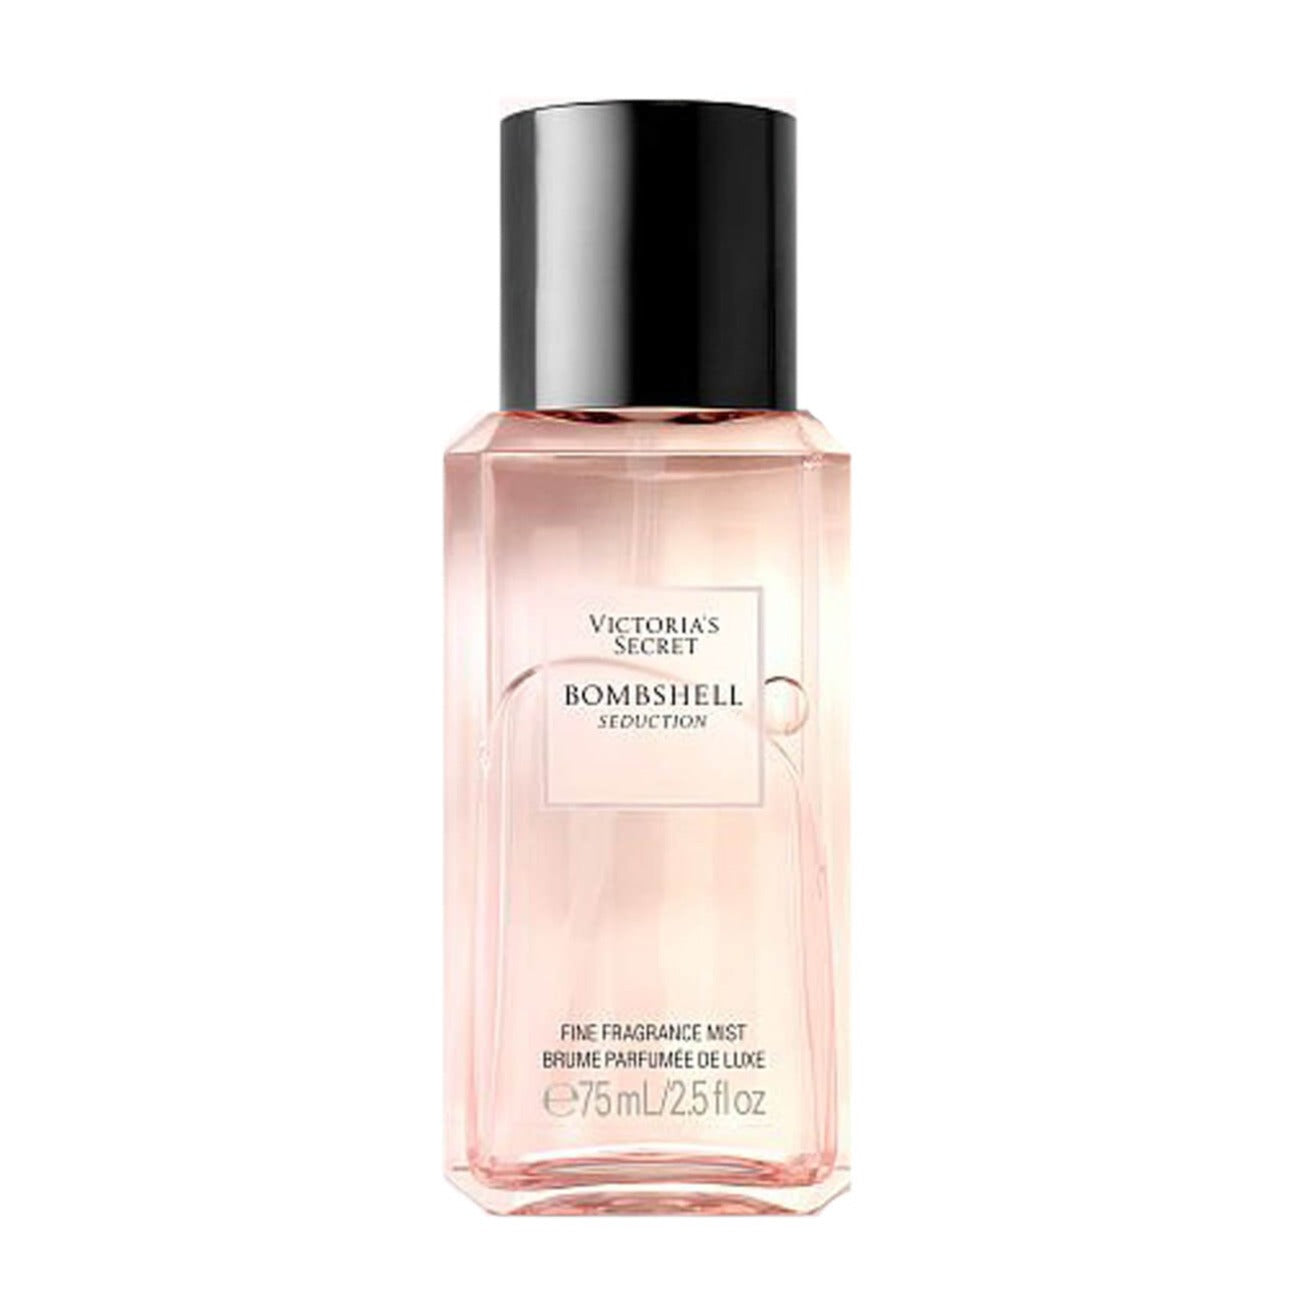 victoria secret travel size mist bombshell seduction available at heygirl.pk for delivery in Pakistan